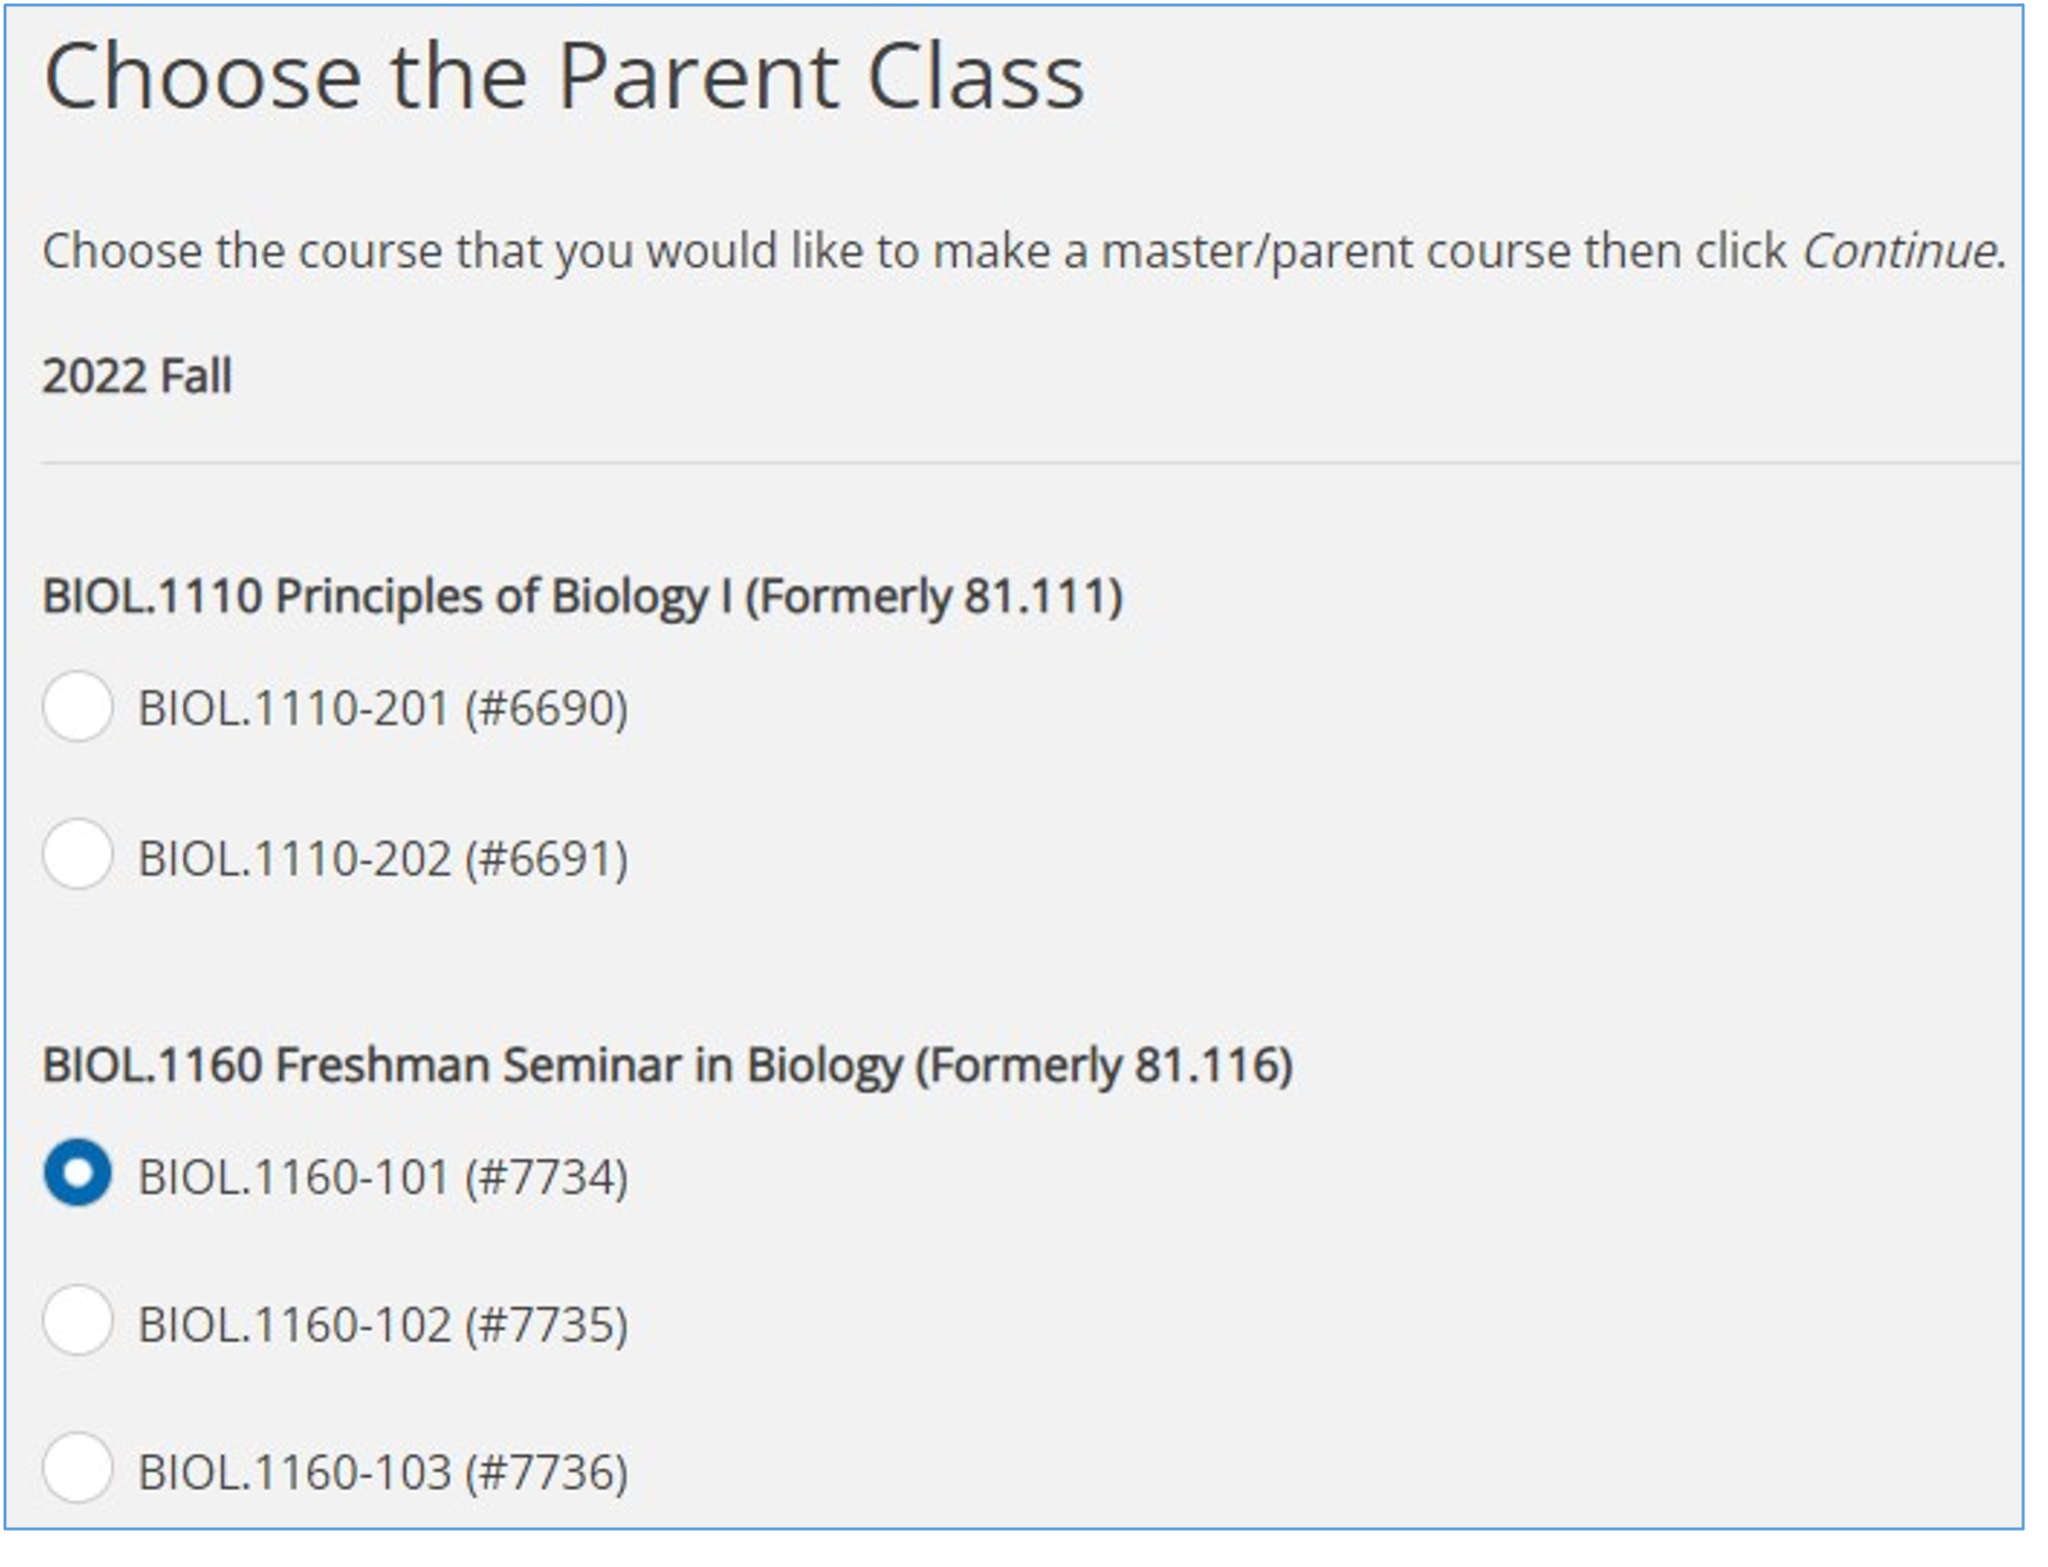 image of where you'll choose your parent class